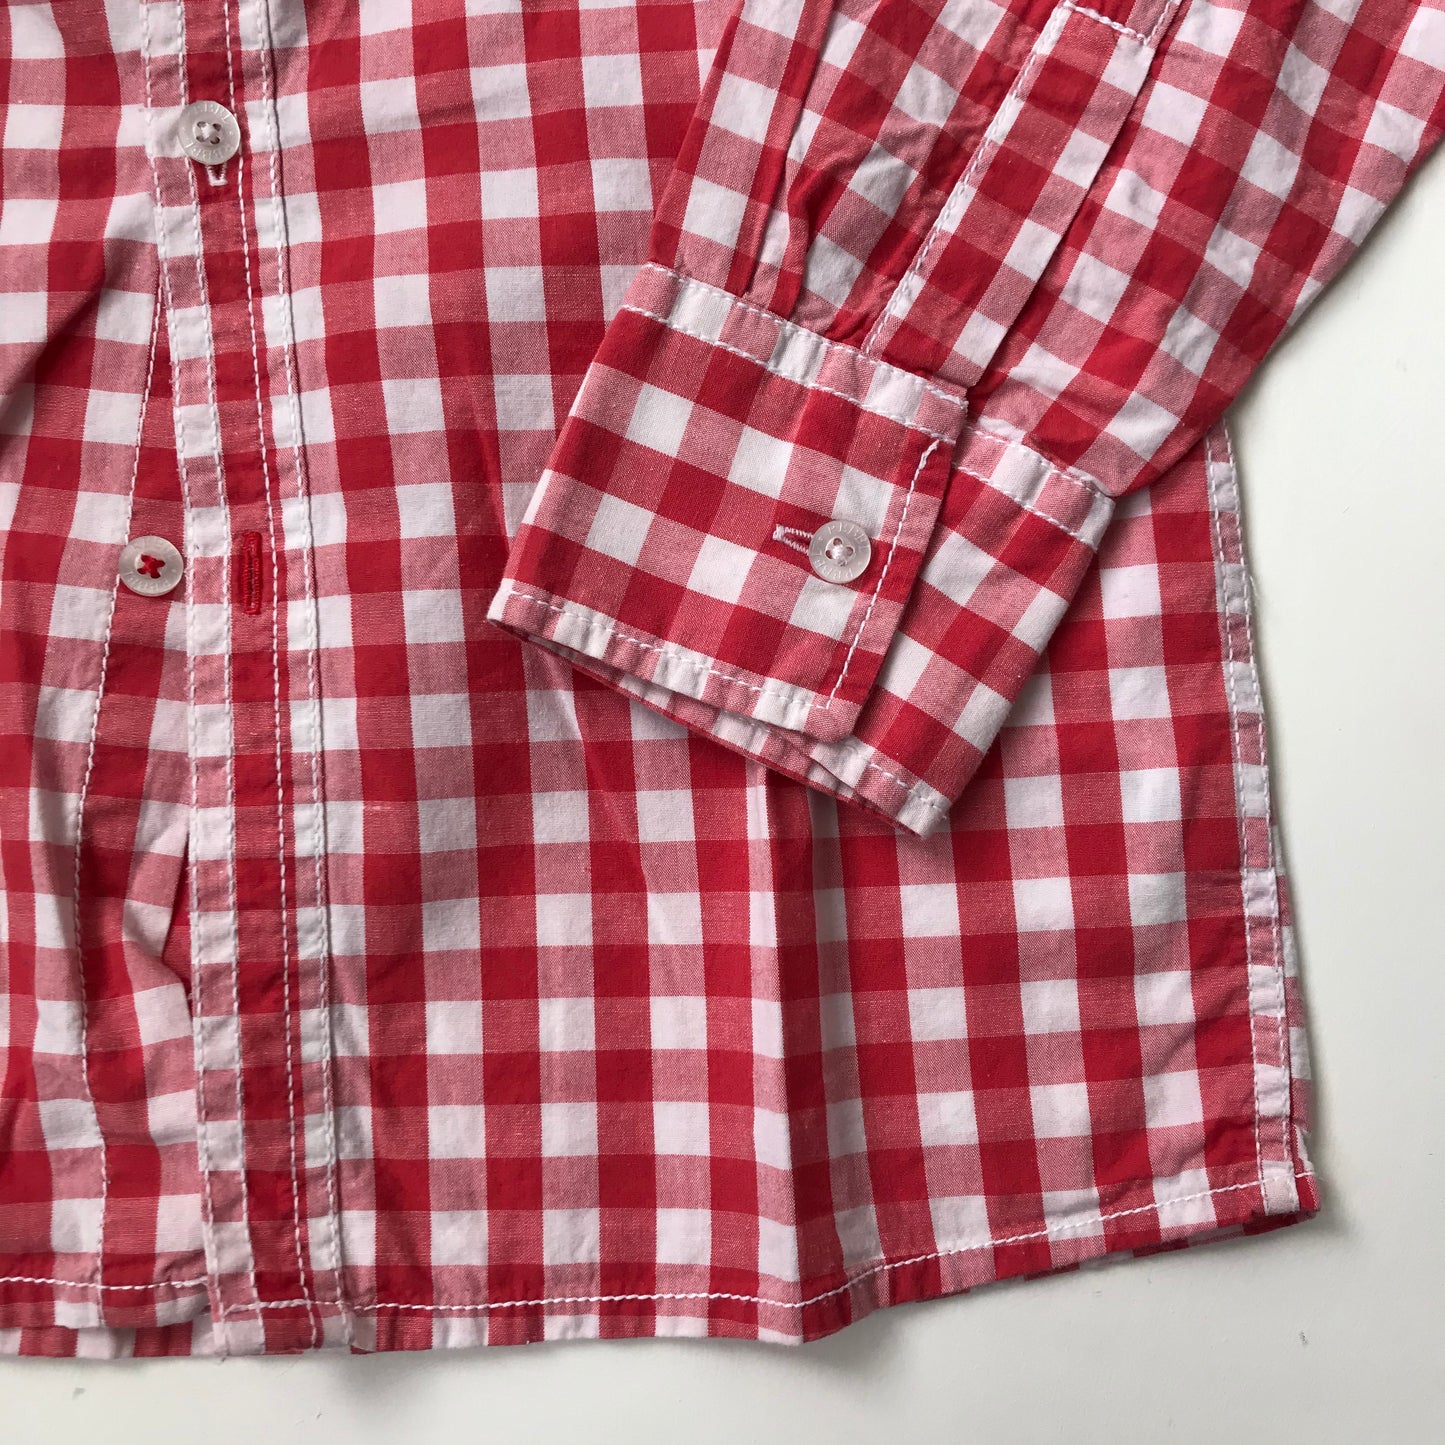 Shirt - Red & White Check - Age 9